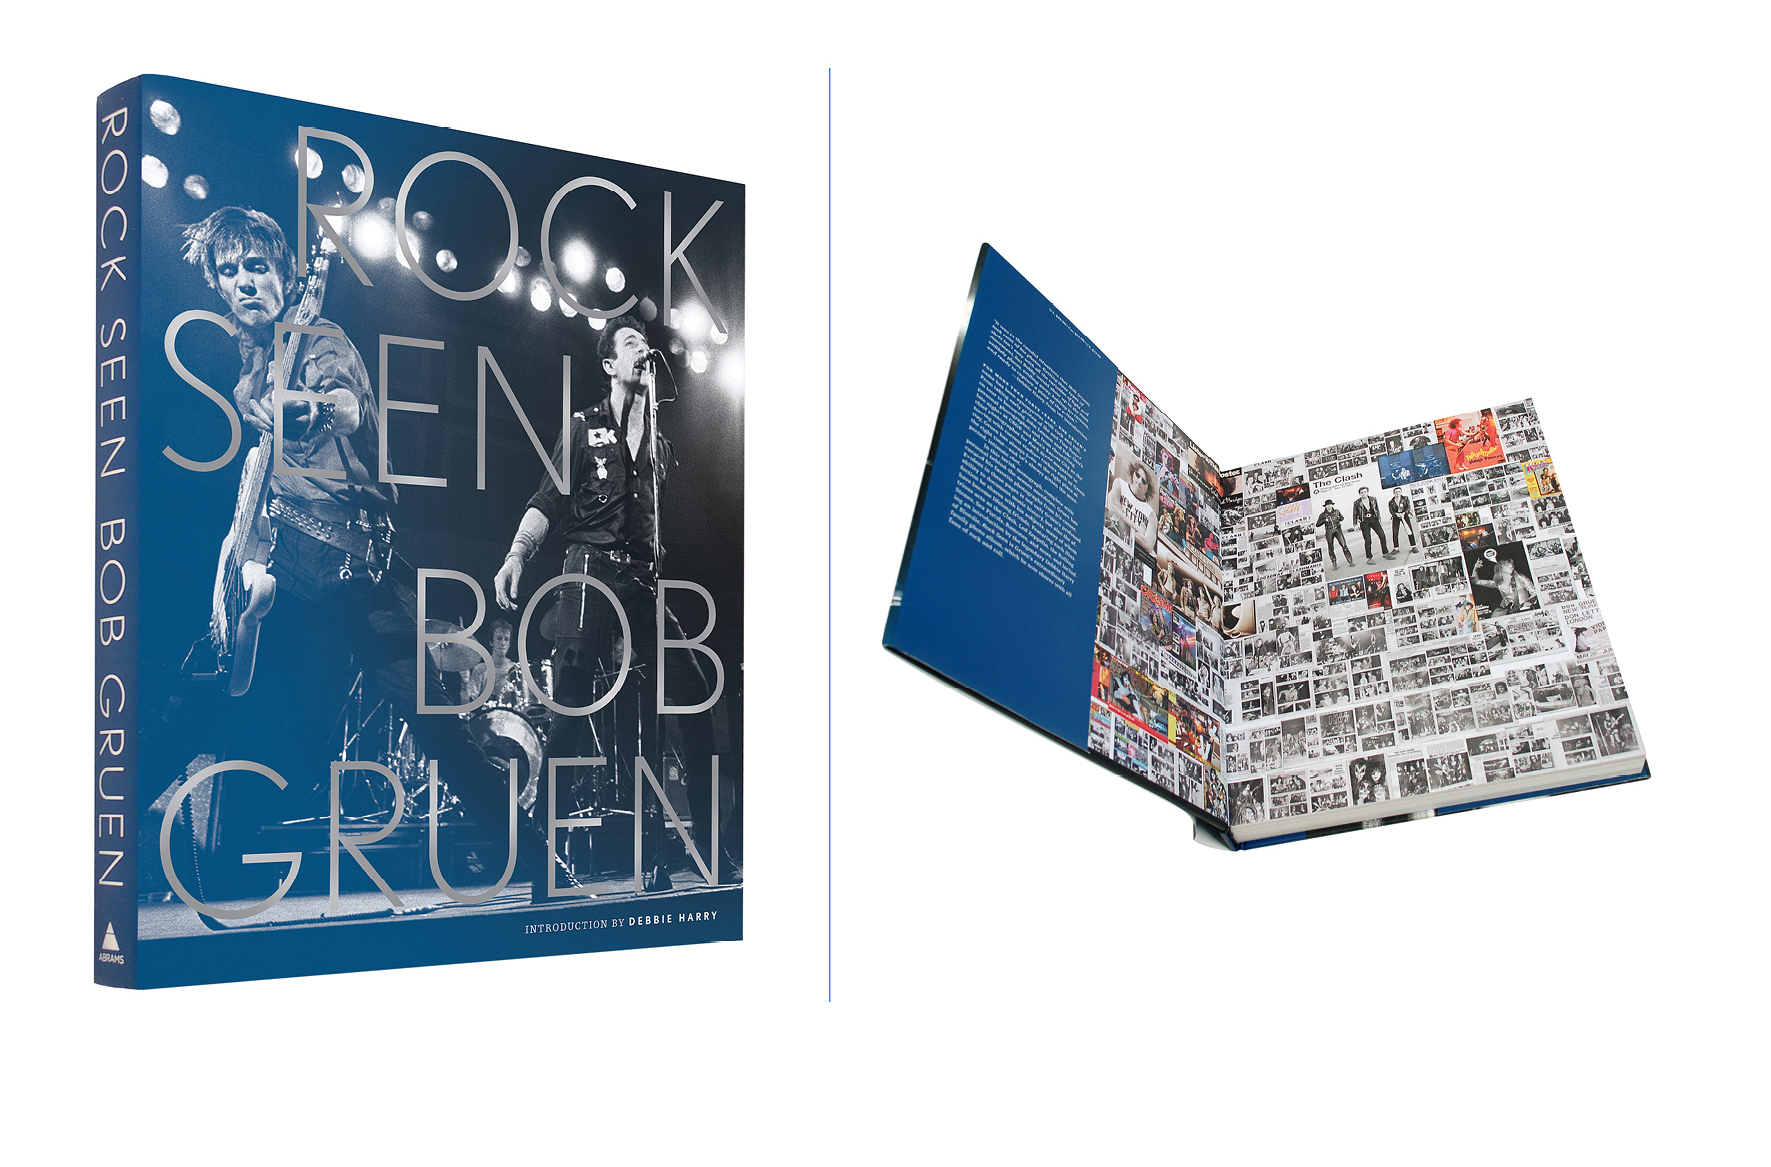   Rock Seen -  10 X 12 in., 288 pg., hardcover with jacket, foil stamped title. Design; Galen Smith // Publisher; Abrams Books 